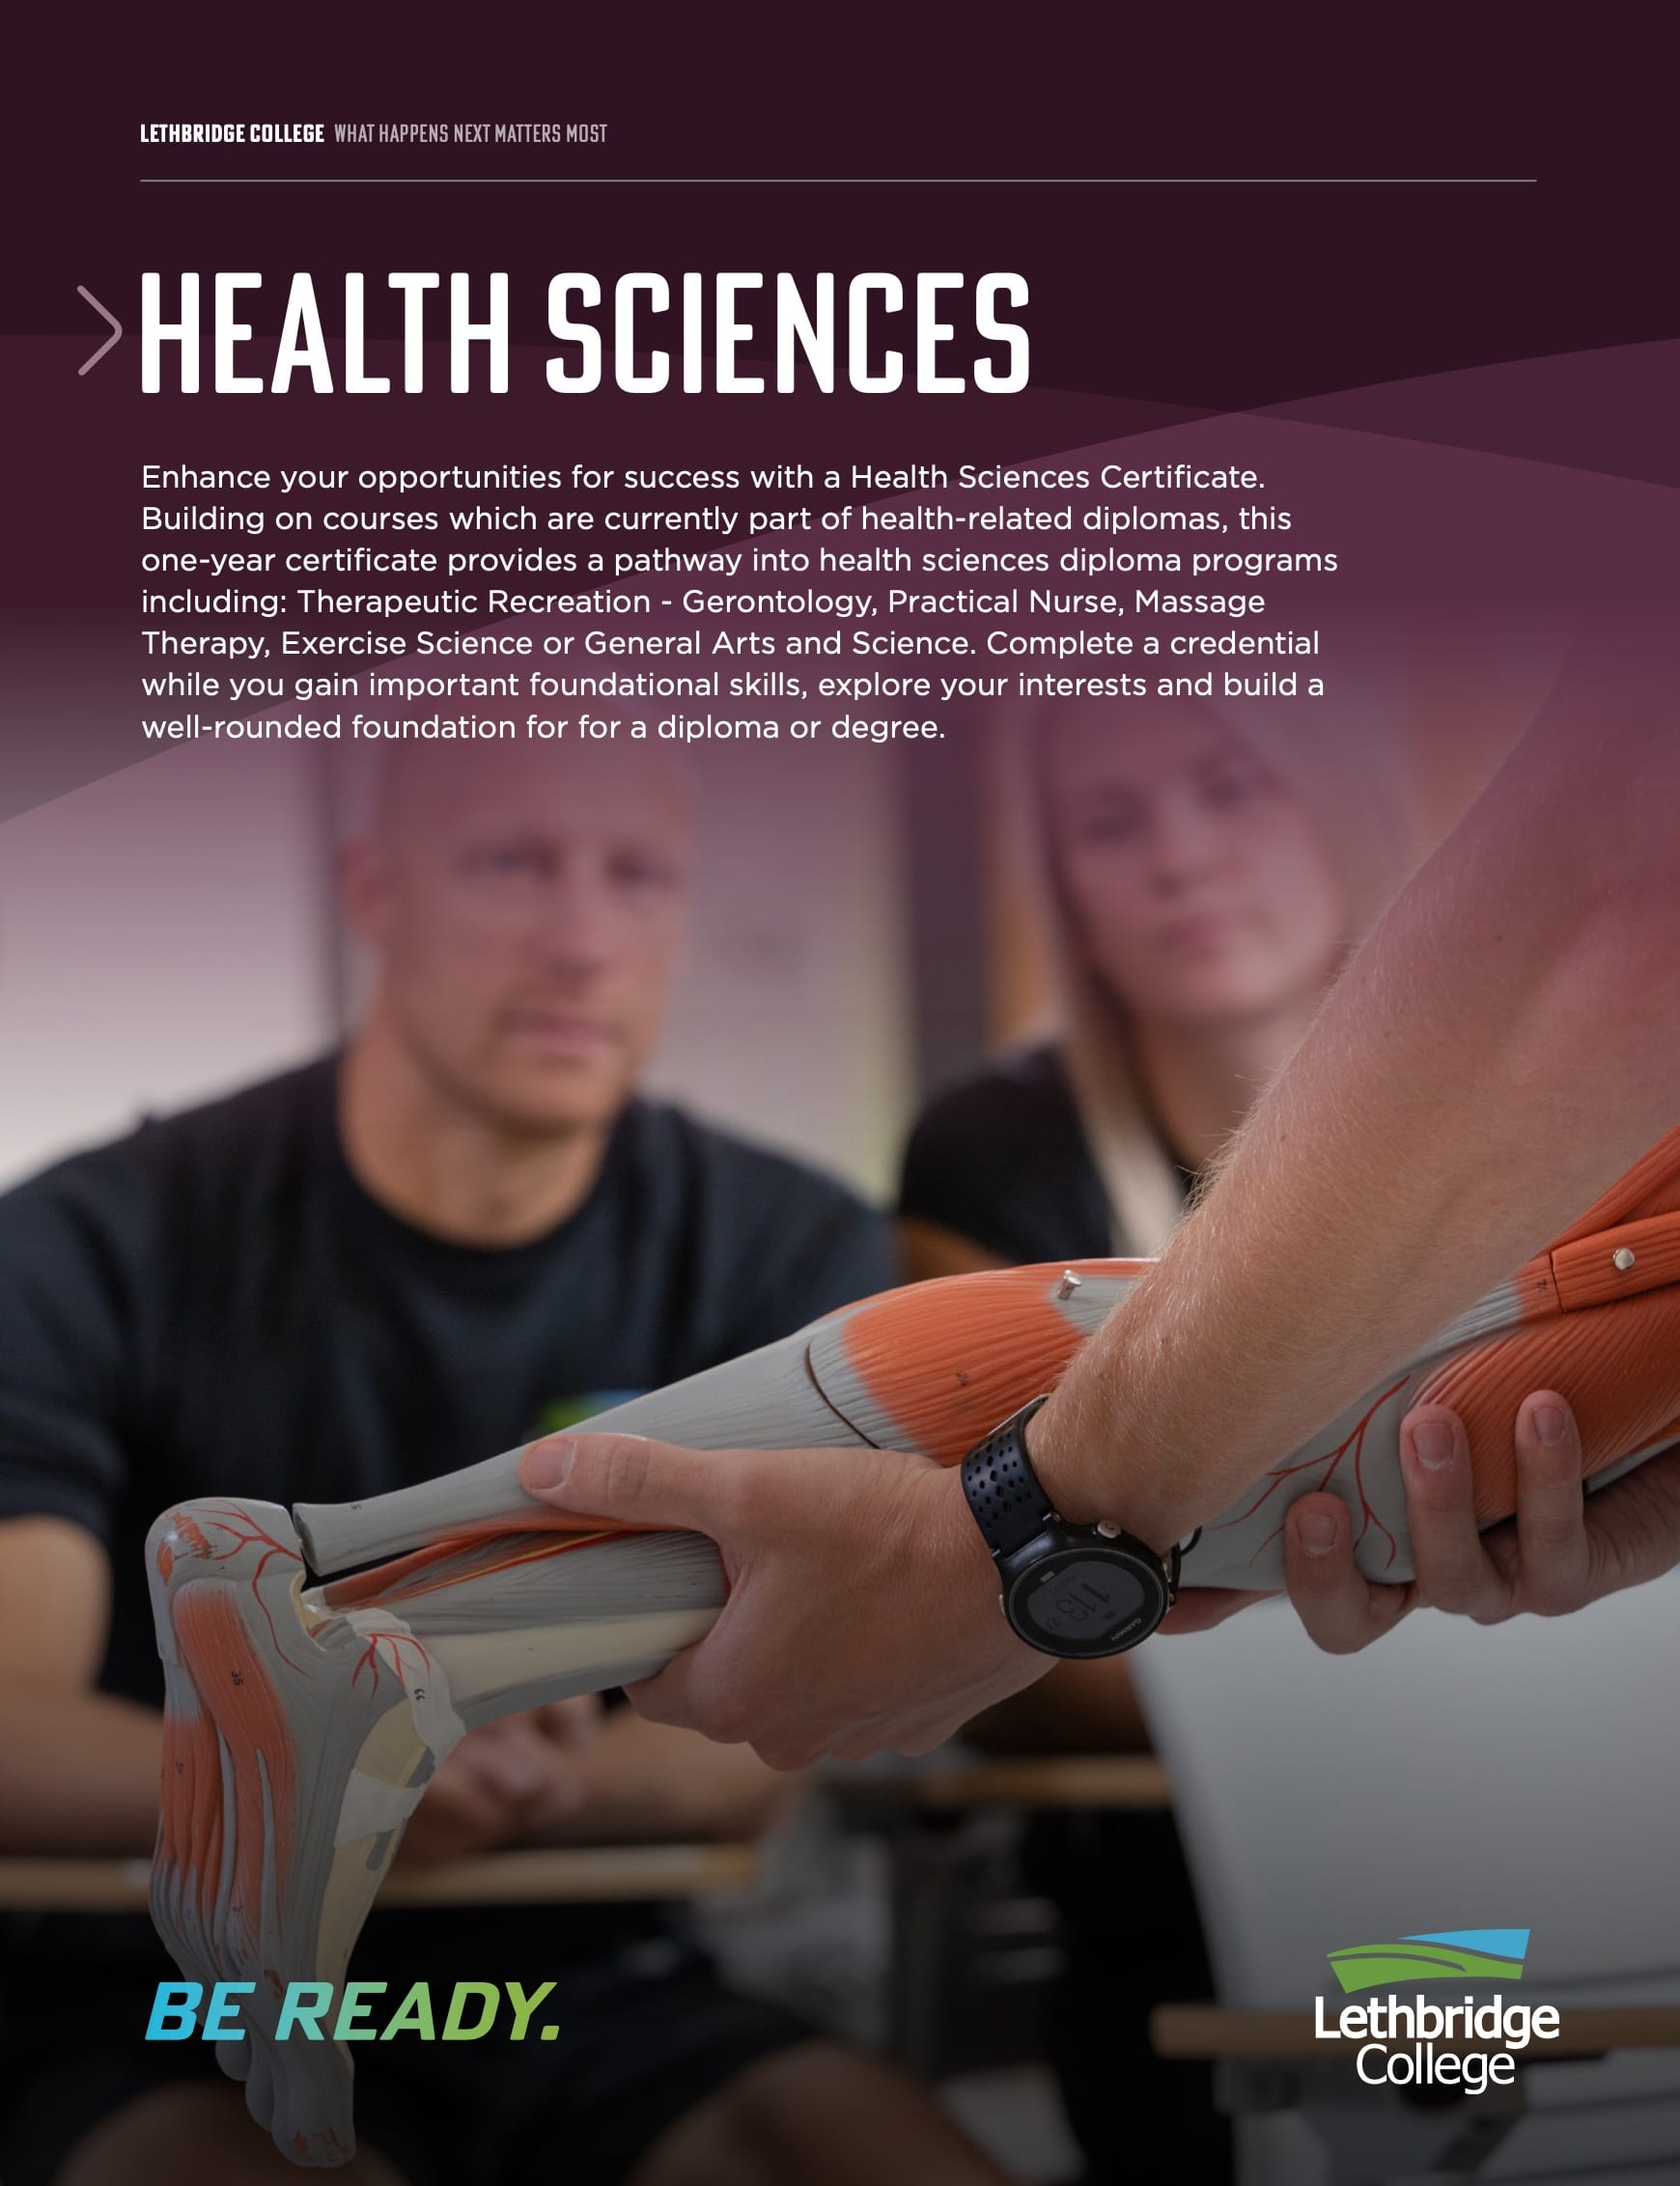 Exercise Science - Arts & Sciences